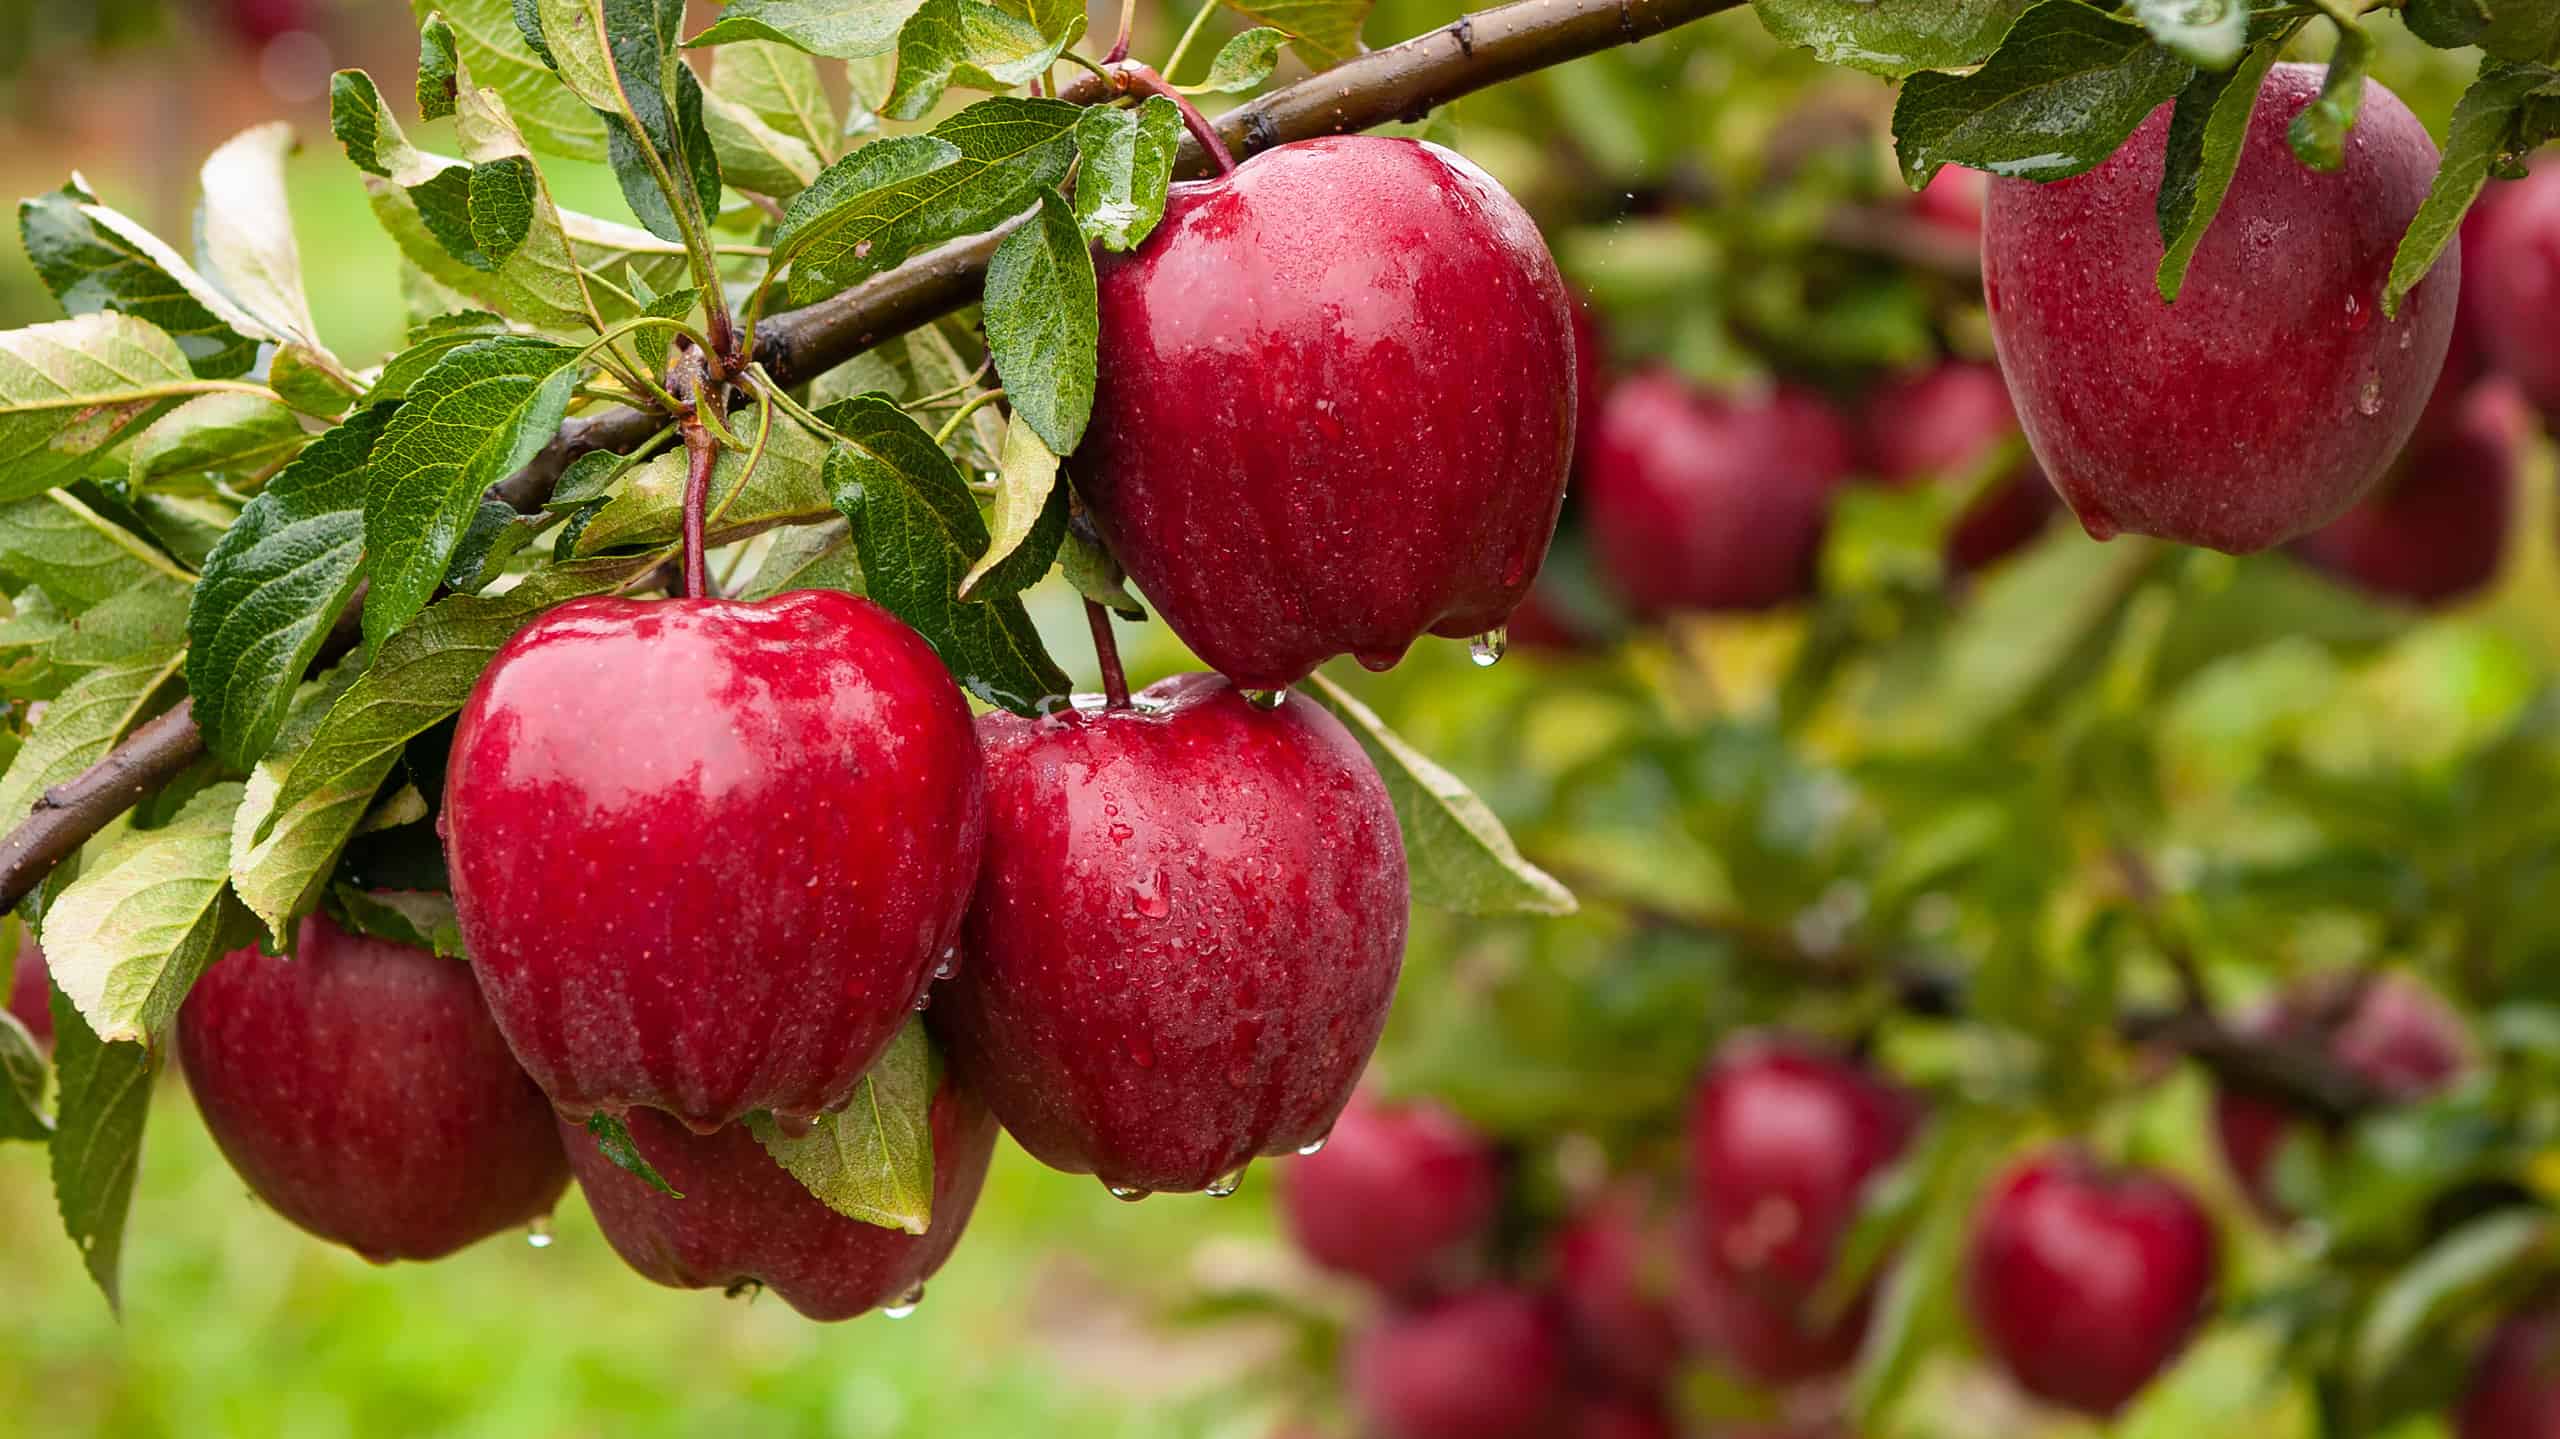 How To Grow An Apple Tree From A Seed